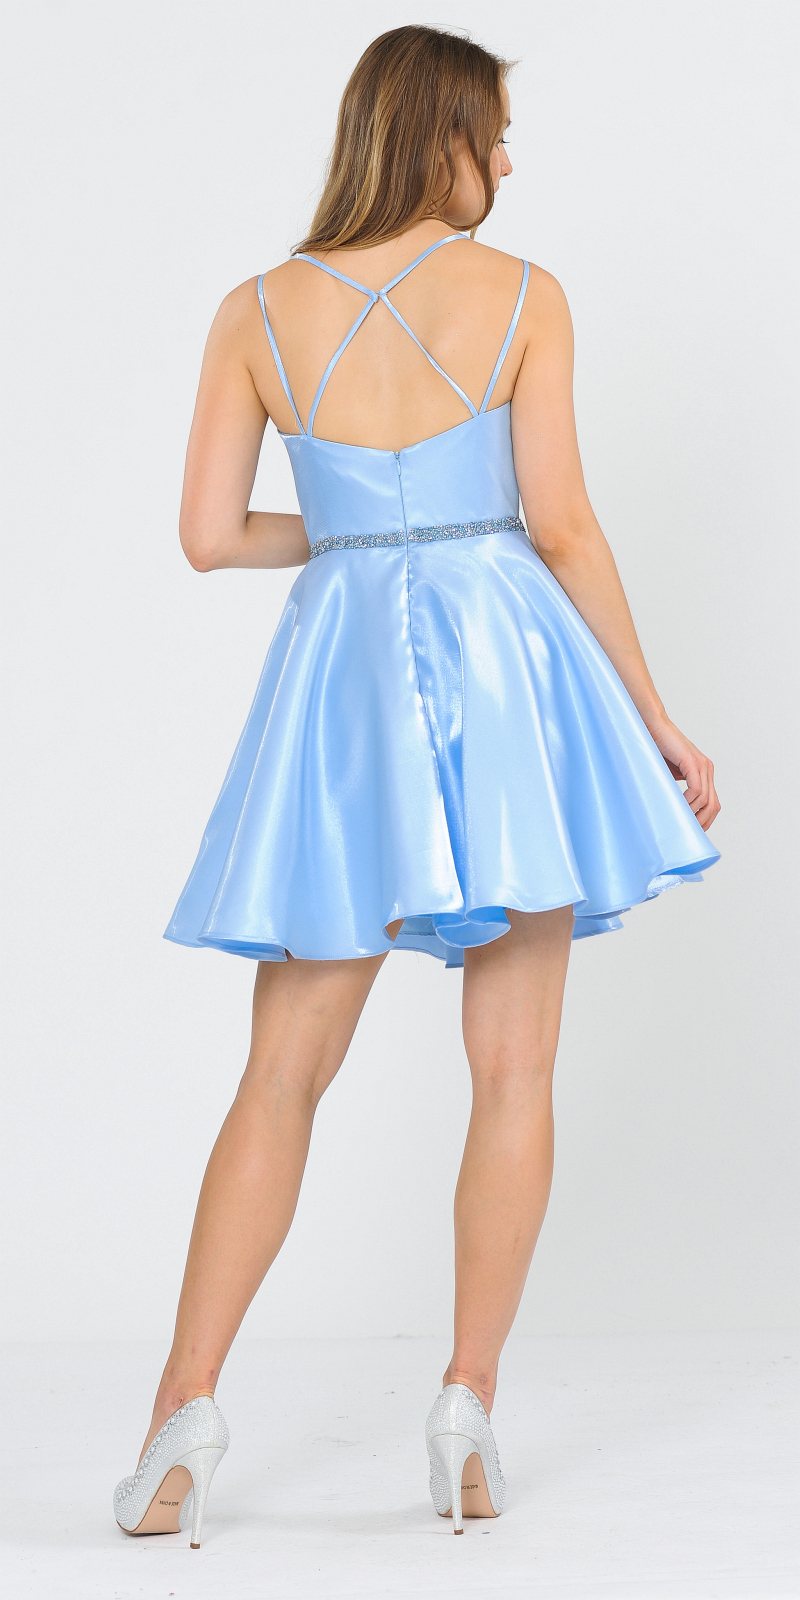 Embellished Waist with Pockets Homecoming Short Dress Baby Blue